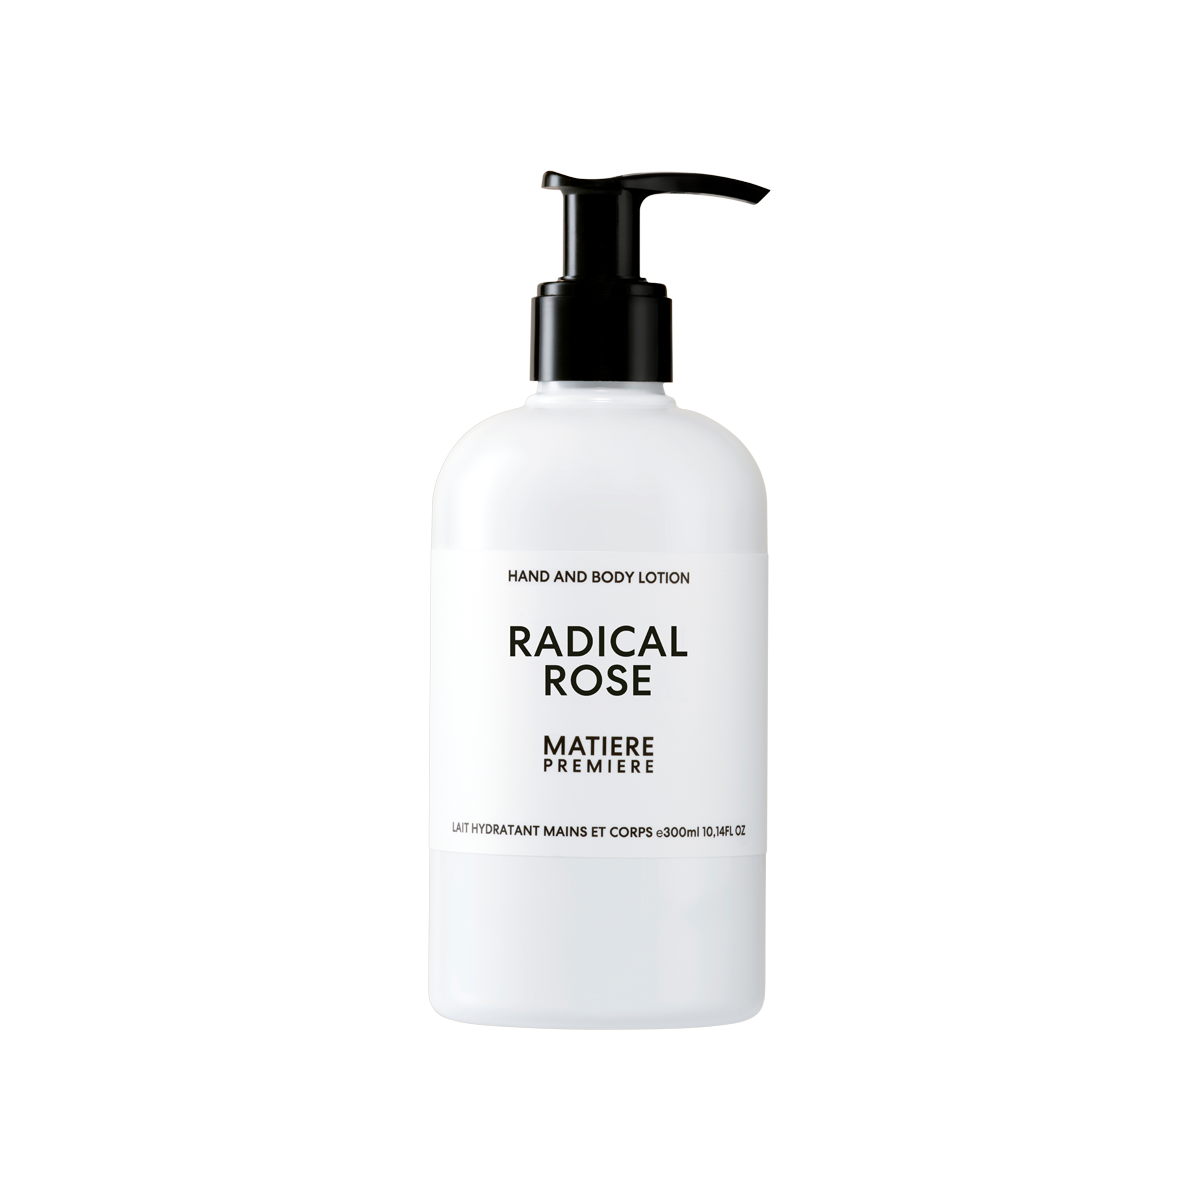 Matiere Premiere - Hand and body lotion Radical Rose